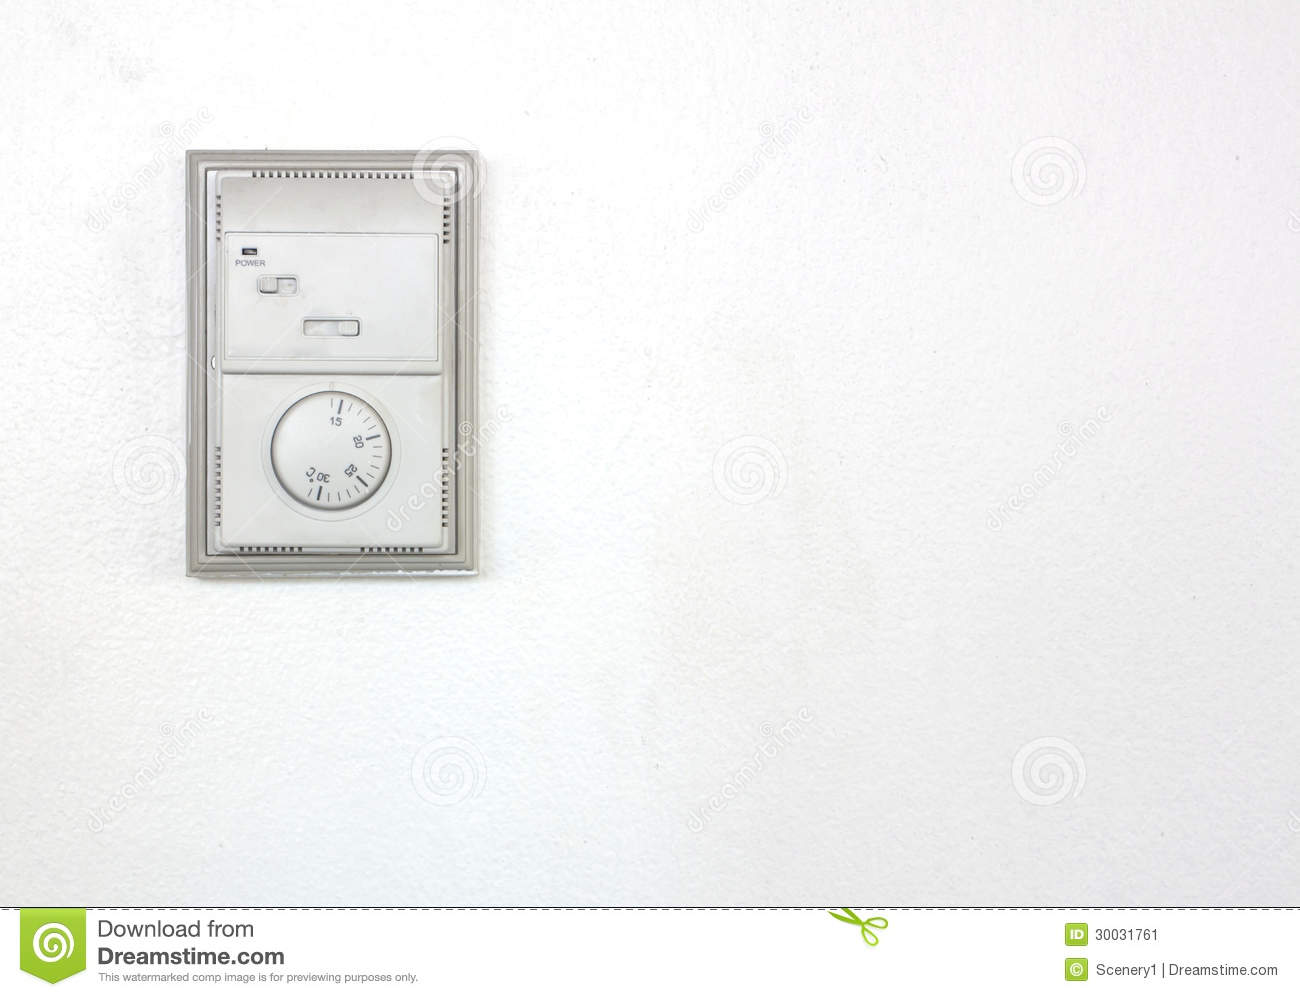 Room Air Stock Image   Image  30031761